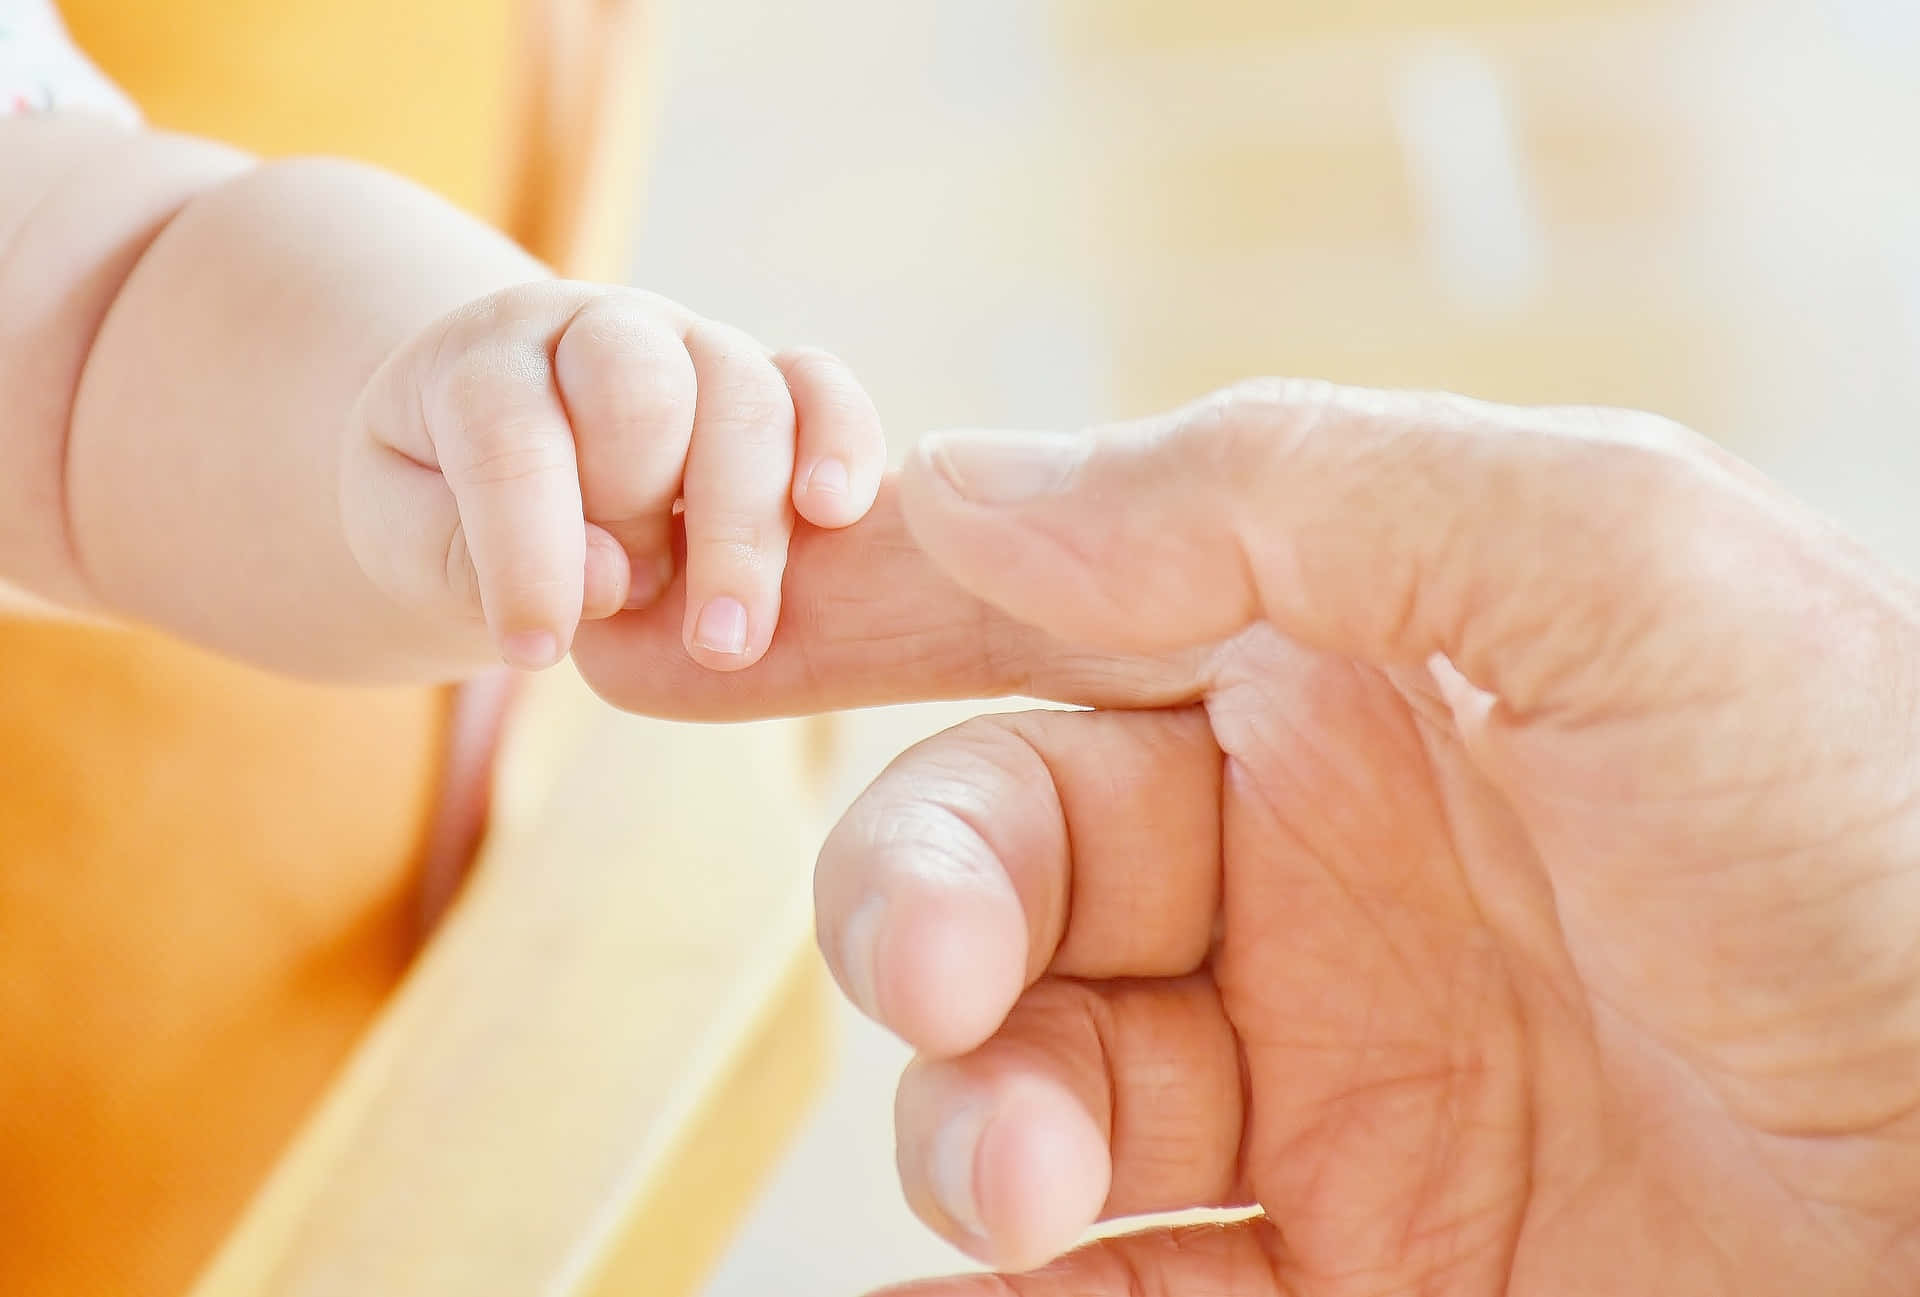 Photo Of Tangible Touching Of Hands Of A Baby And Older Person Wallpaper